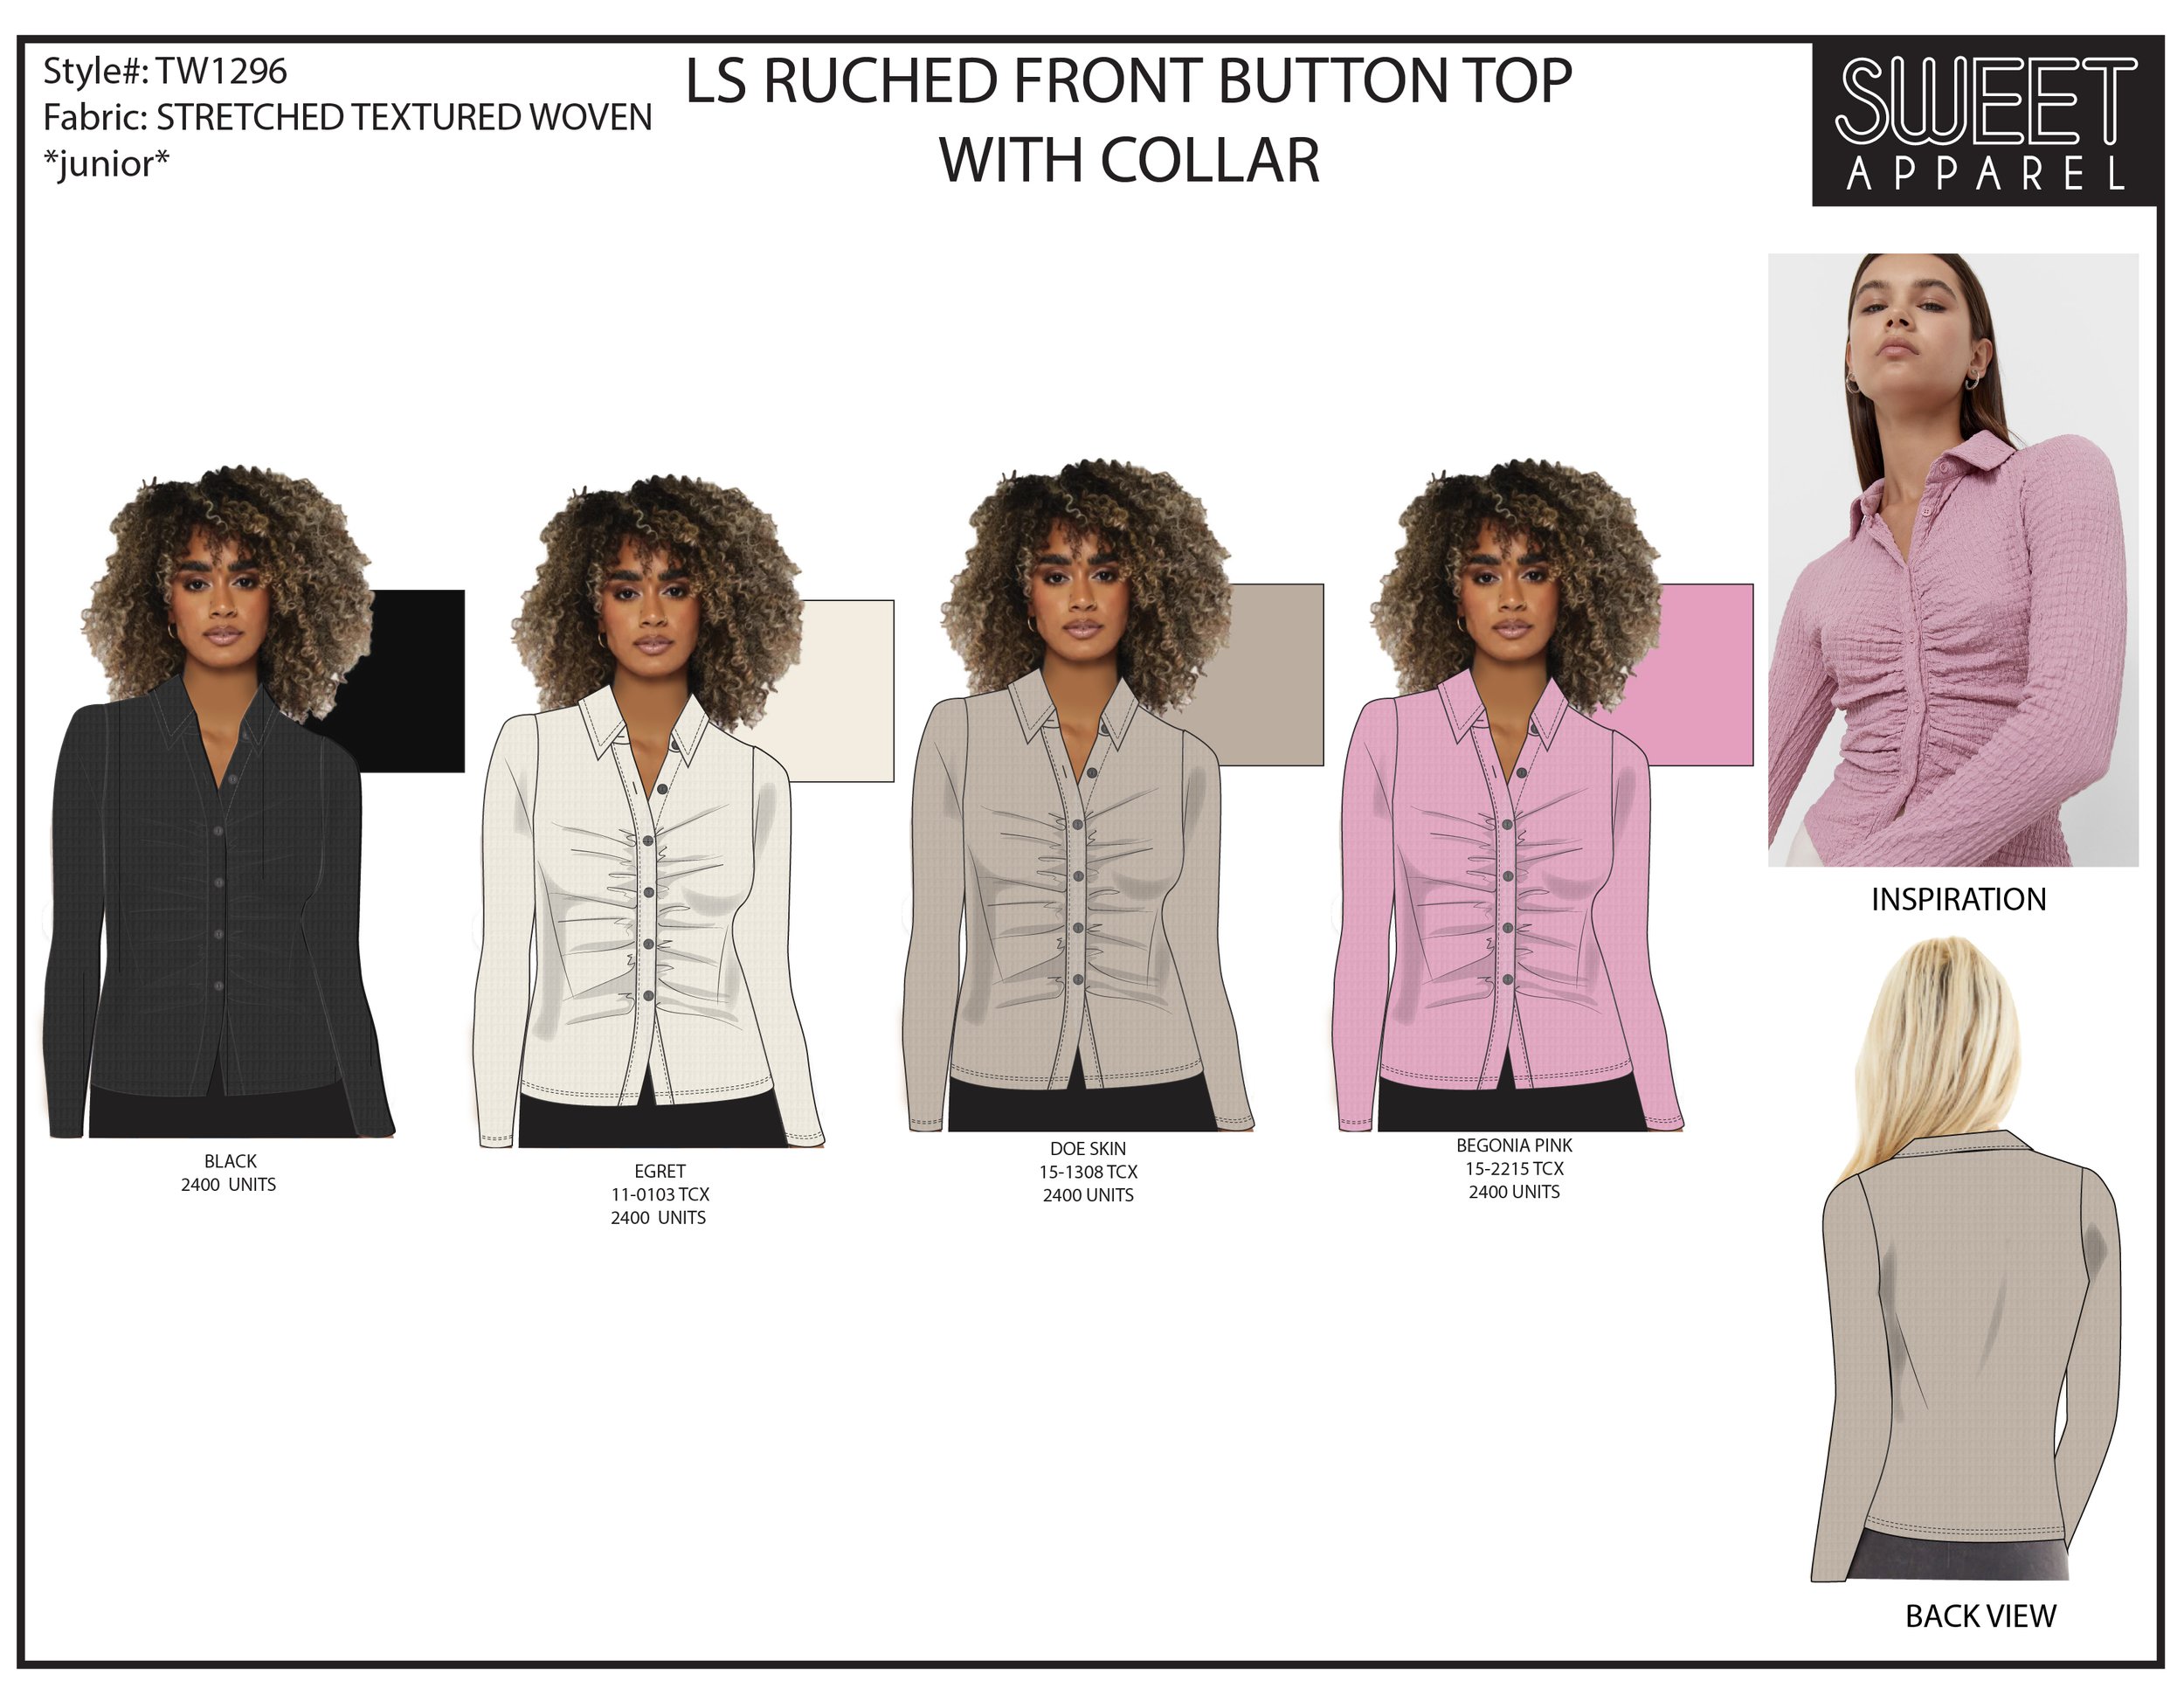 TW1296 LS RUCHED FRONT BUTTON TOP -01.jpg